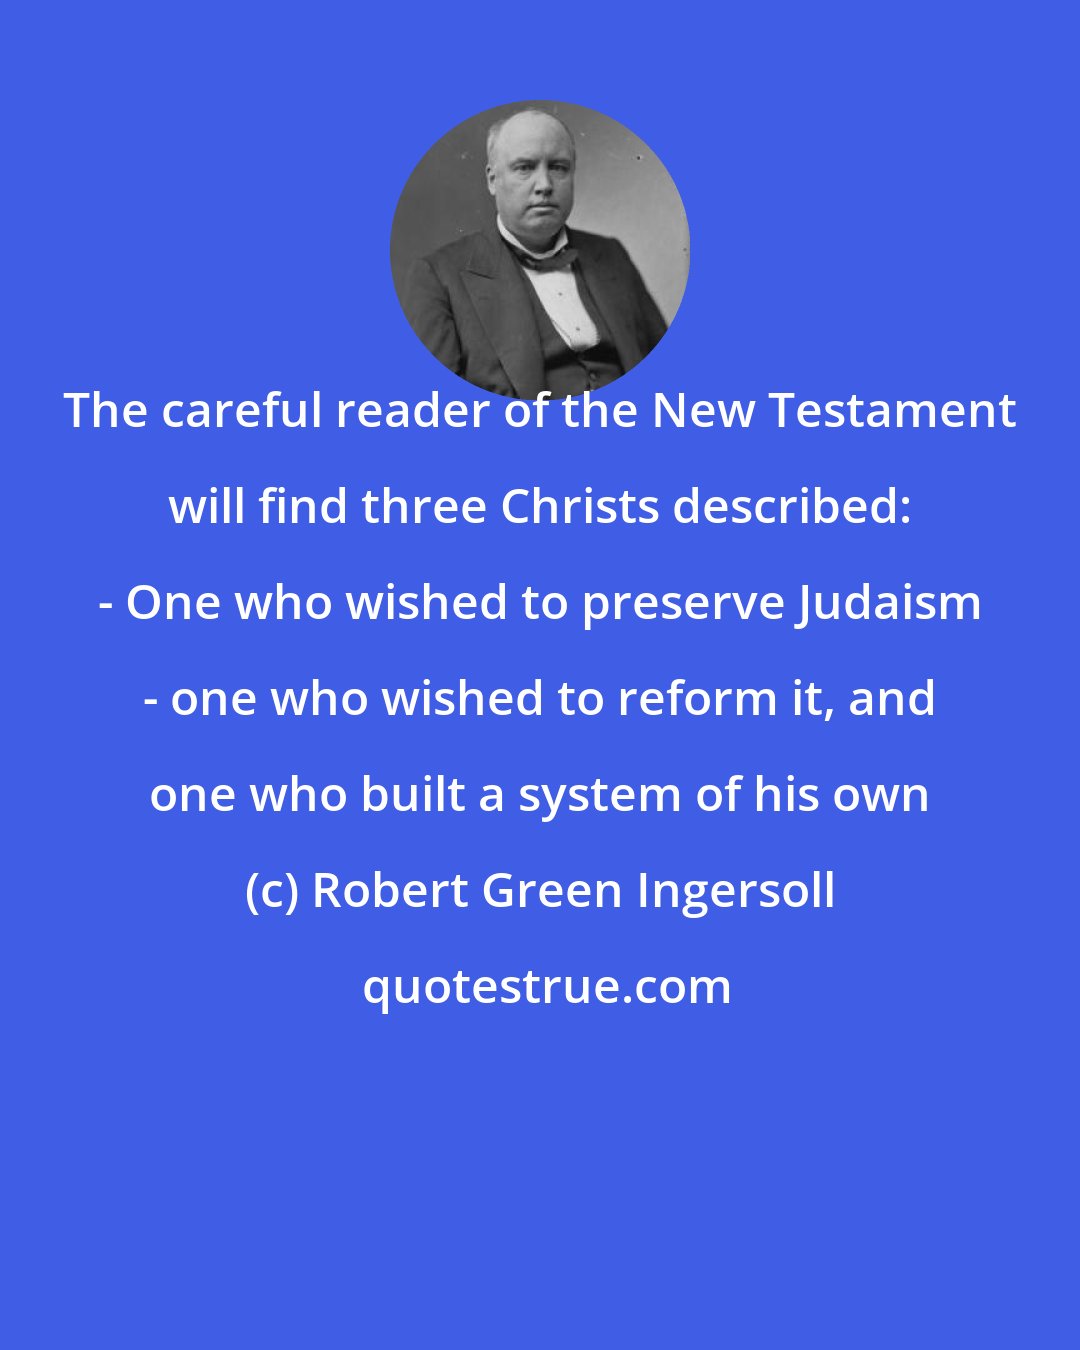 Robert Green Ingersoll: The careful reader of the New Testament will find three Christs described: - One who wished to preserve Judaism - one who wished to reform it, and one who built a system of his own